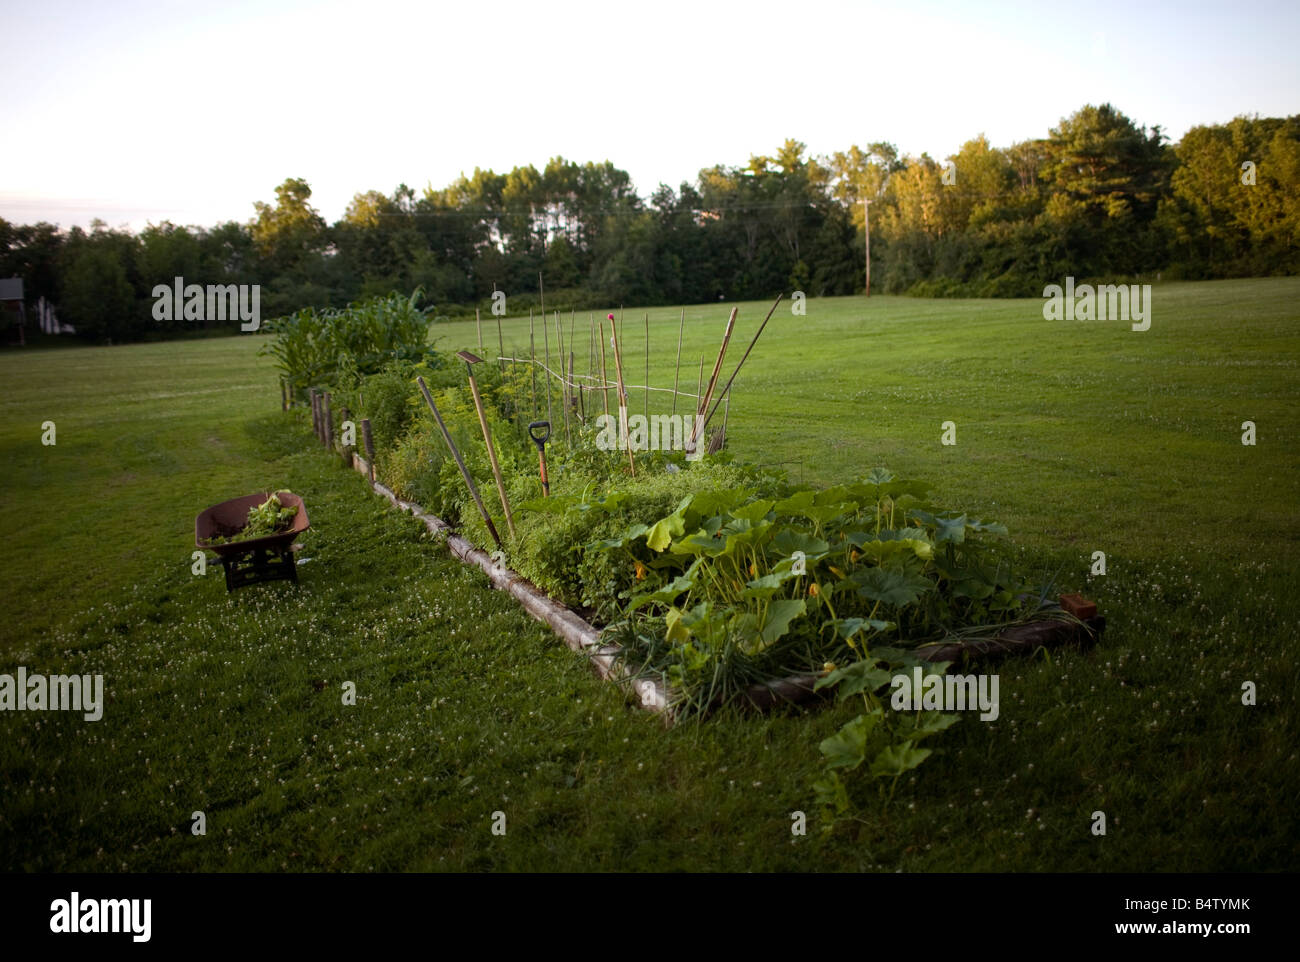 A vegetable garden in a field in New England, USA. Stock Photo